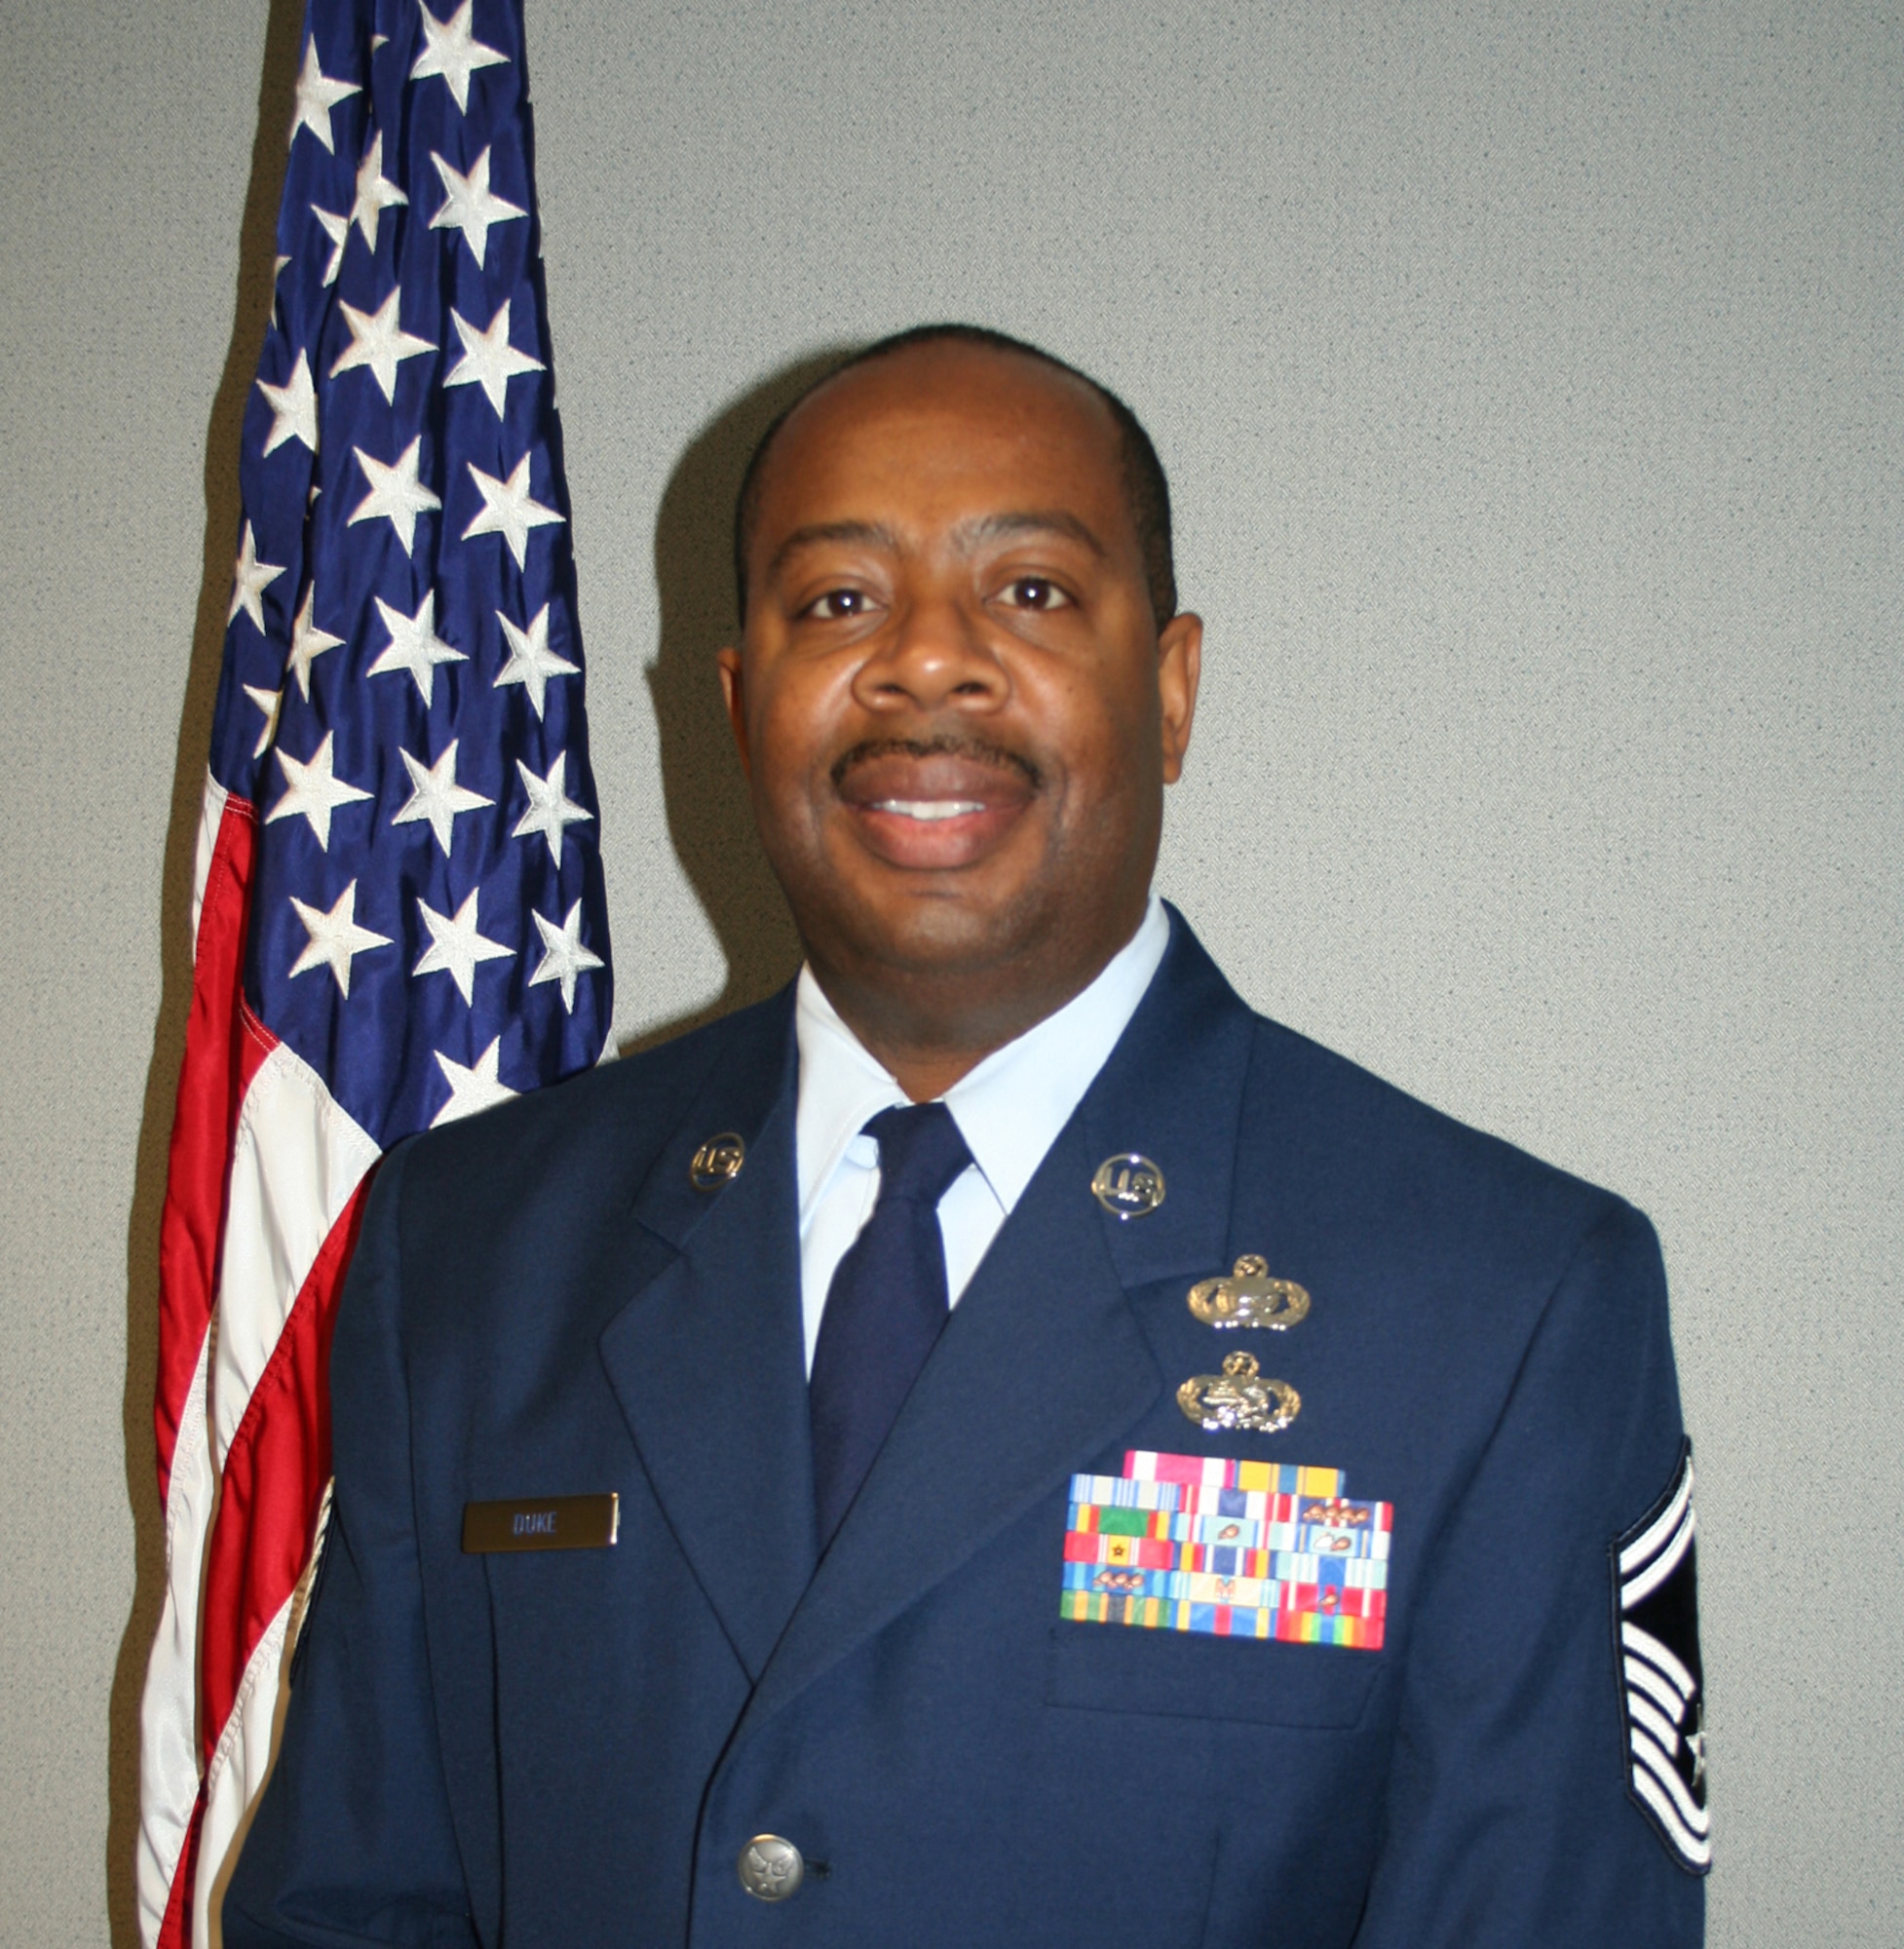 WRIGHT-PATTERSON AIR FORCE BASE, Ohio - Senior Master Sgt. Charles Duke has been selected as the Senior Non-Commissioned Officer of the Year.  He is assigned to the 445th Aeromedical Evacuation Squadron.  Sergeant Duke was selected as the unit’s top performer during a recent unit compliance inspection and as a superior performer by the Health Services Inspection team.  Sergeant Duke is a community activist who volunteers and teaches vocational and technical cluster at the YMCA.  He is currently pursuing an education degree in training and development at Northcentral University.